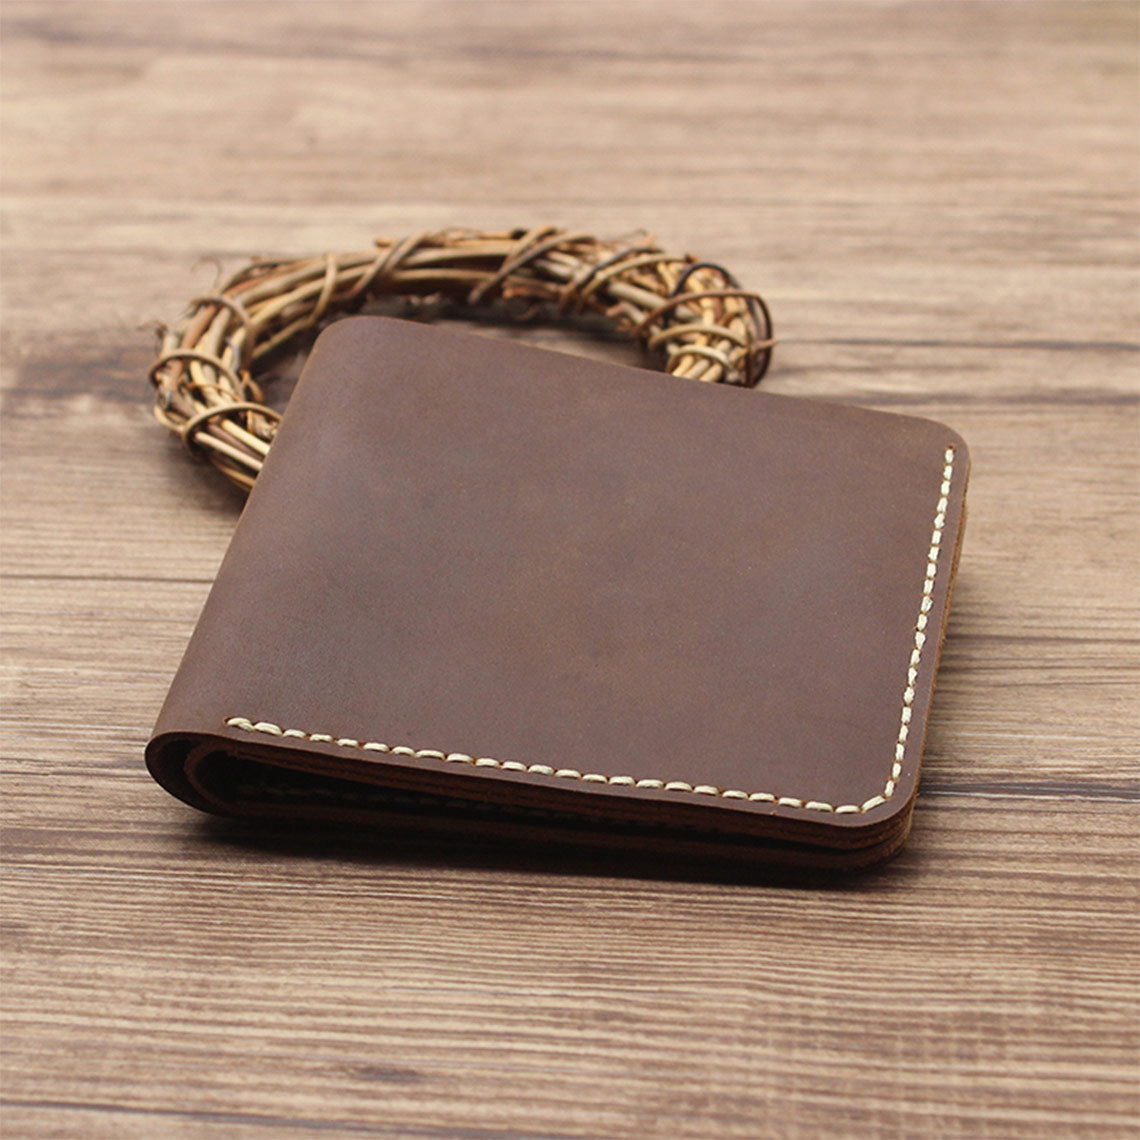 Men's Crazy Horse Genuine Leather Wallet | Hand Sewn Leather Wallet Gift for Father's Day/Birthday